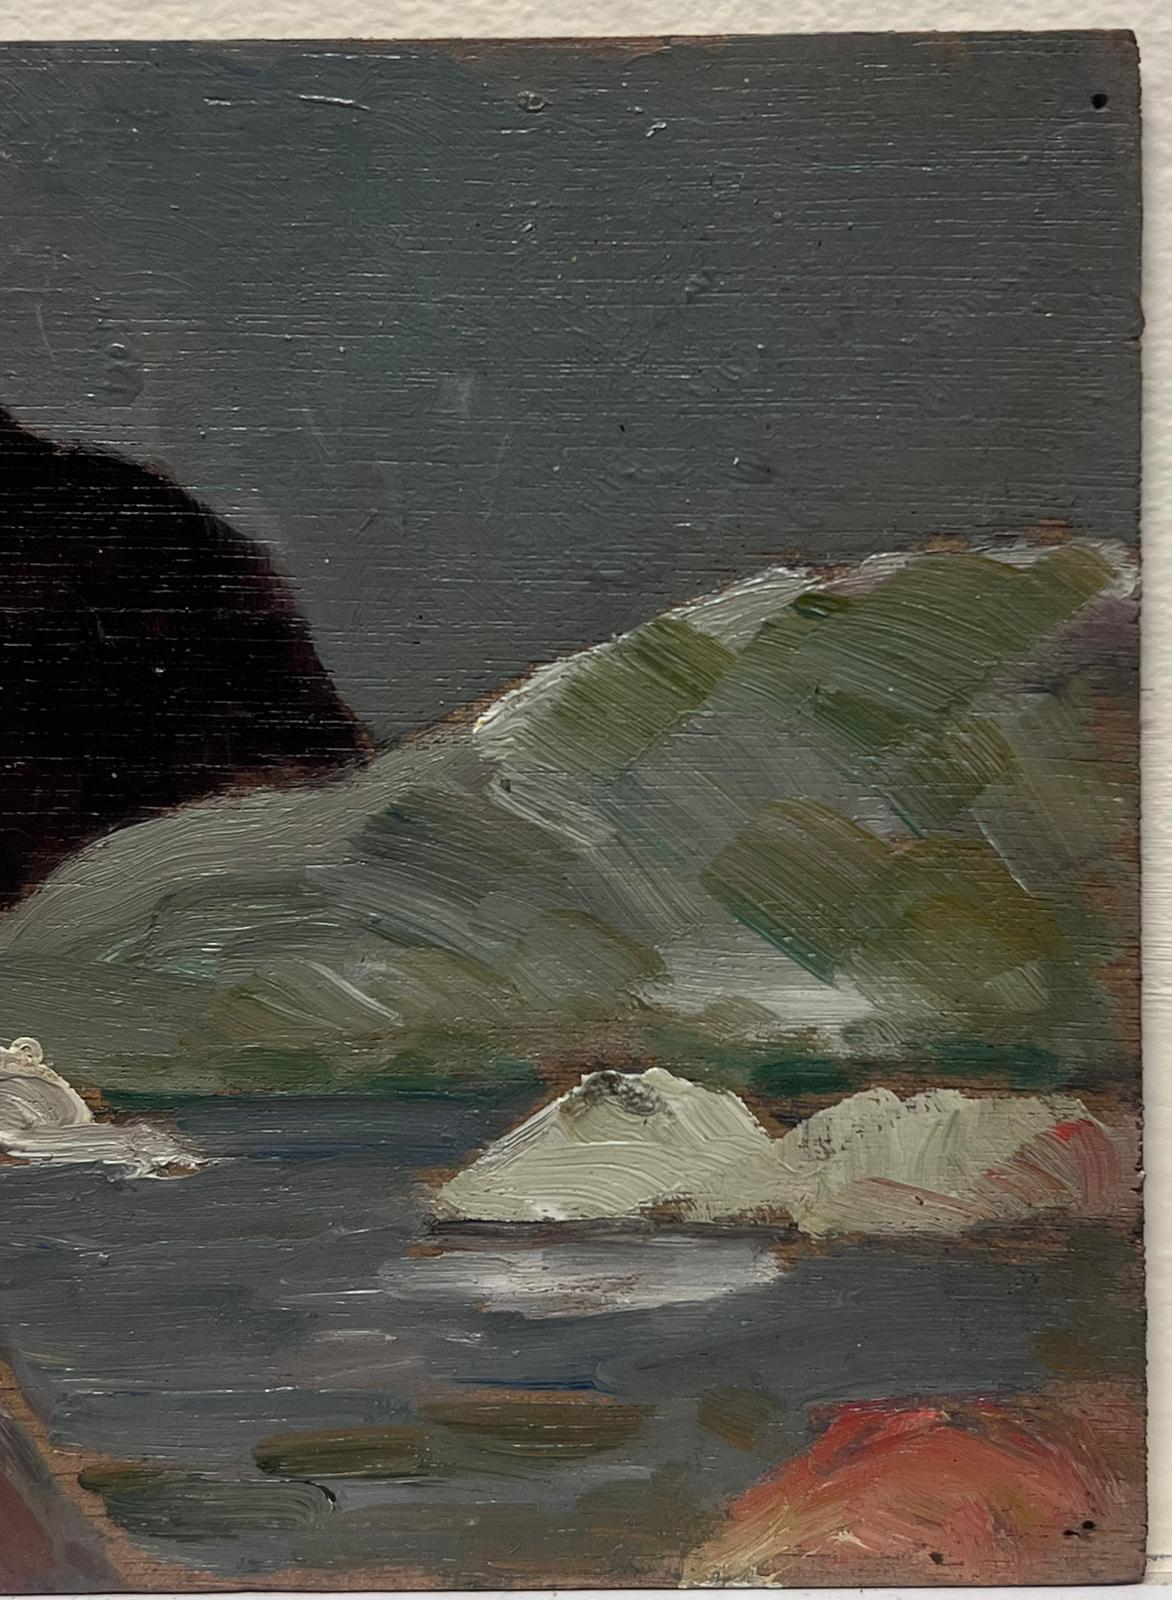 Ice Bergs
by Louise Alix (French, 1888-1980) *see notes below
provenance stamp to the back 
oil painting on board, unframed
measures: 5.5 high by 7 inches wide
condition: overall very good and sound, a few scuffs and marks to the surface and wear to